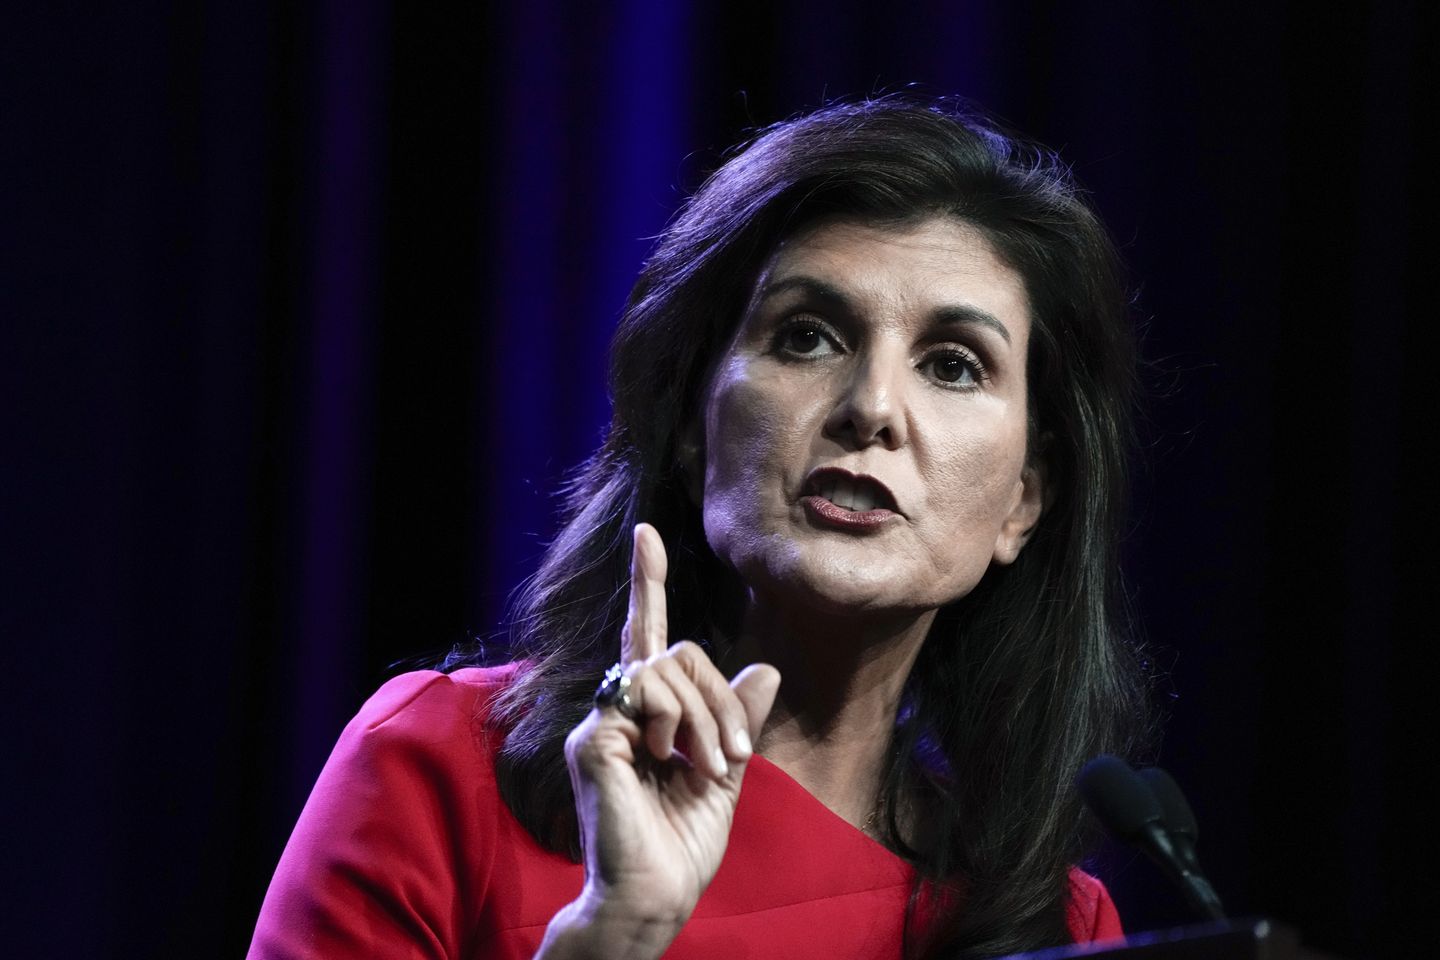 Nikki Haley on Mitch McConnell's health: 'We need new generational leaders'